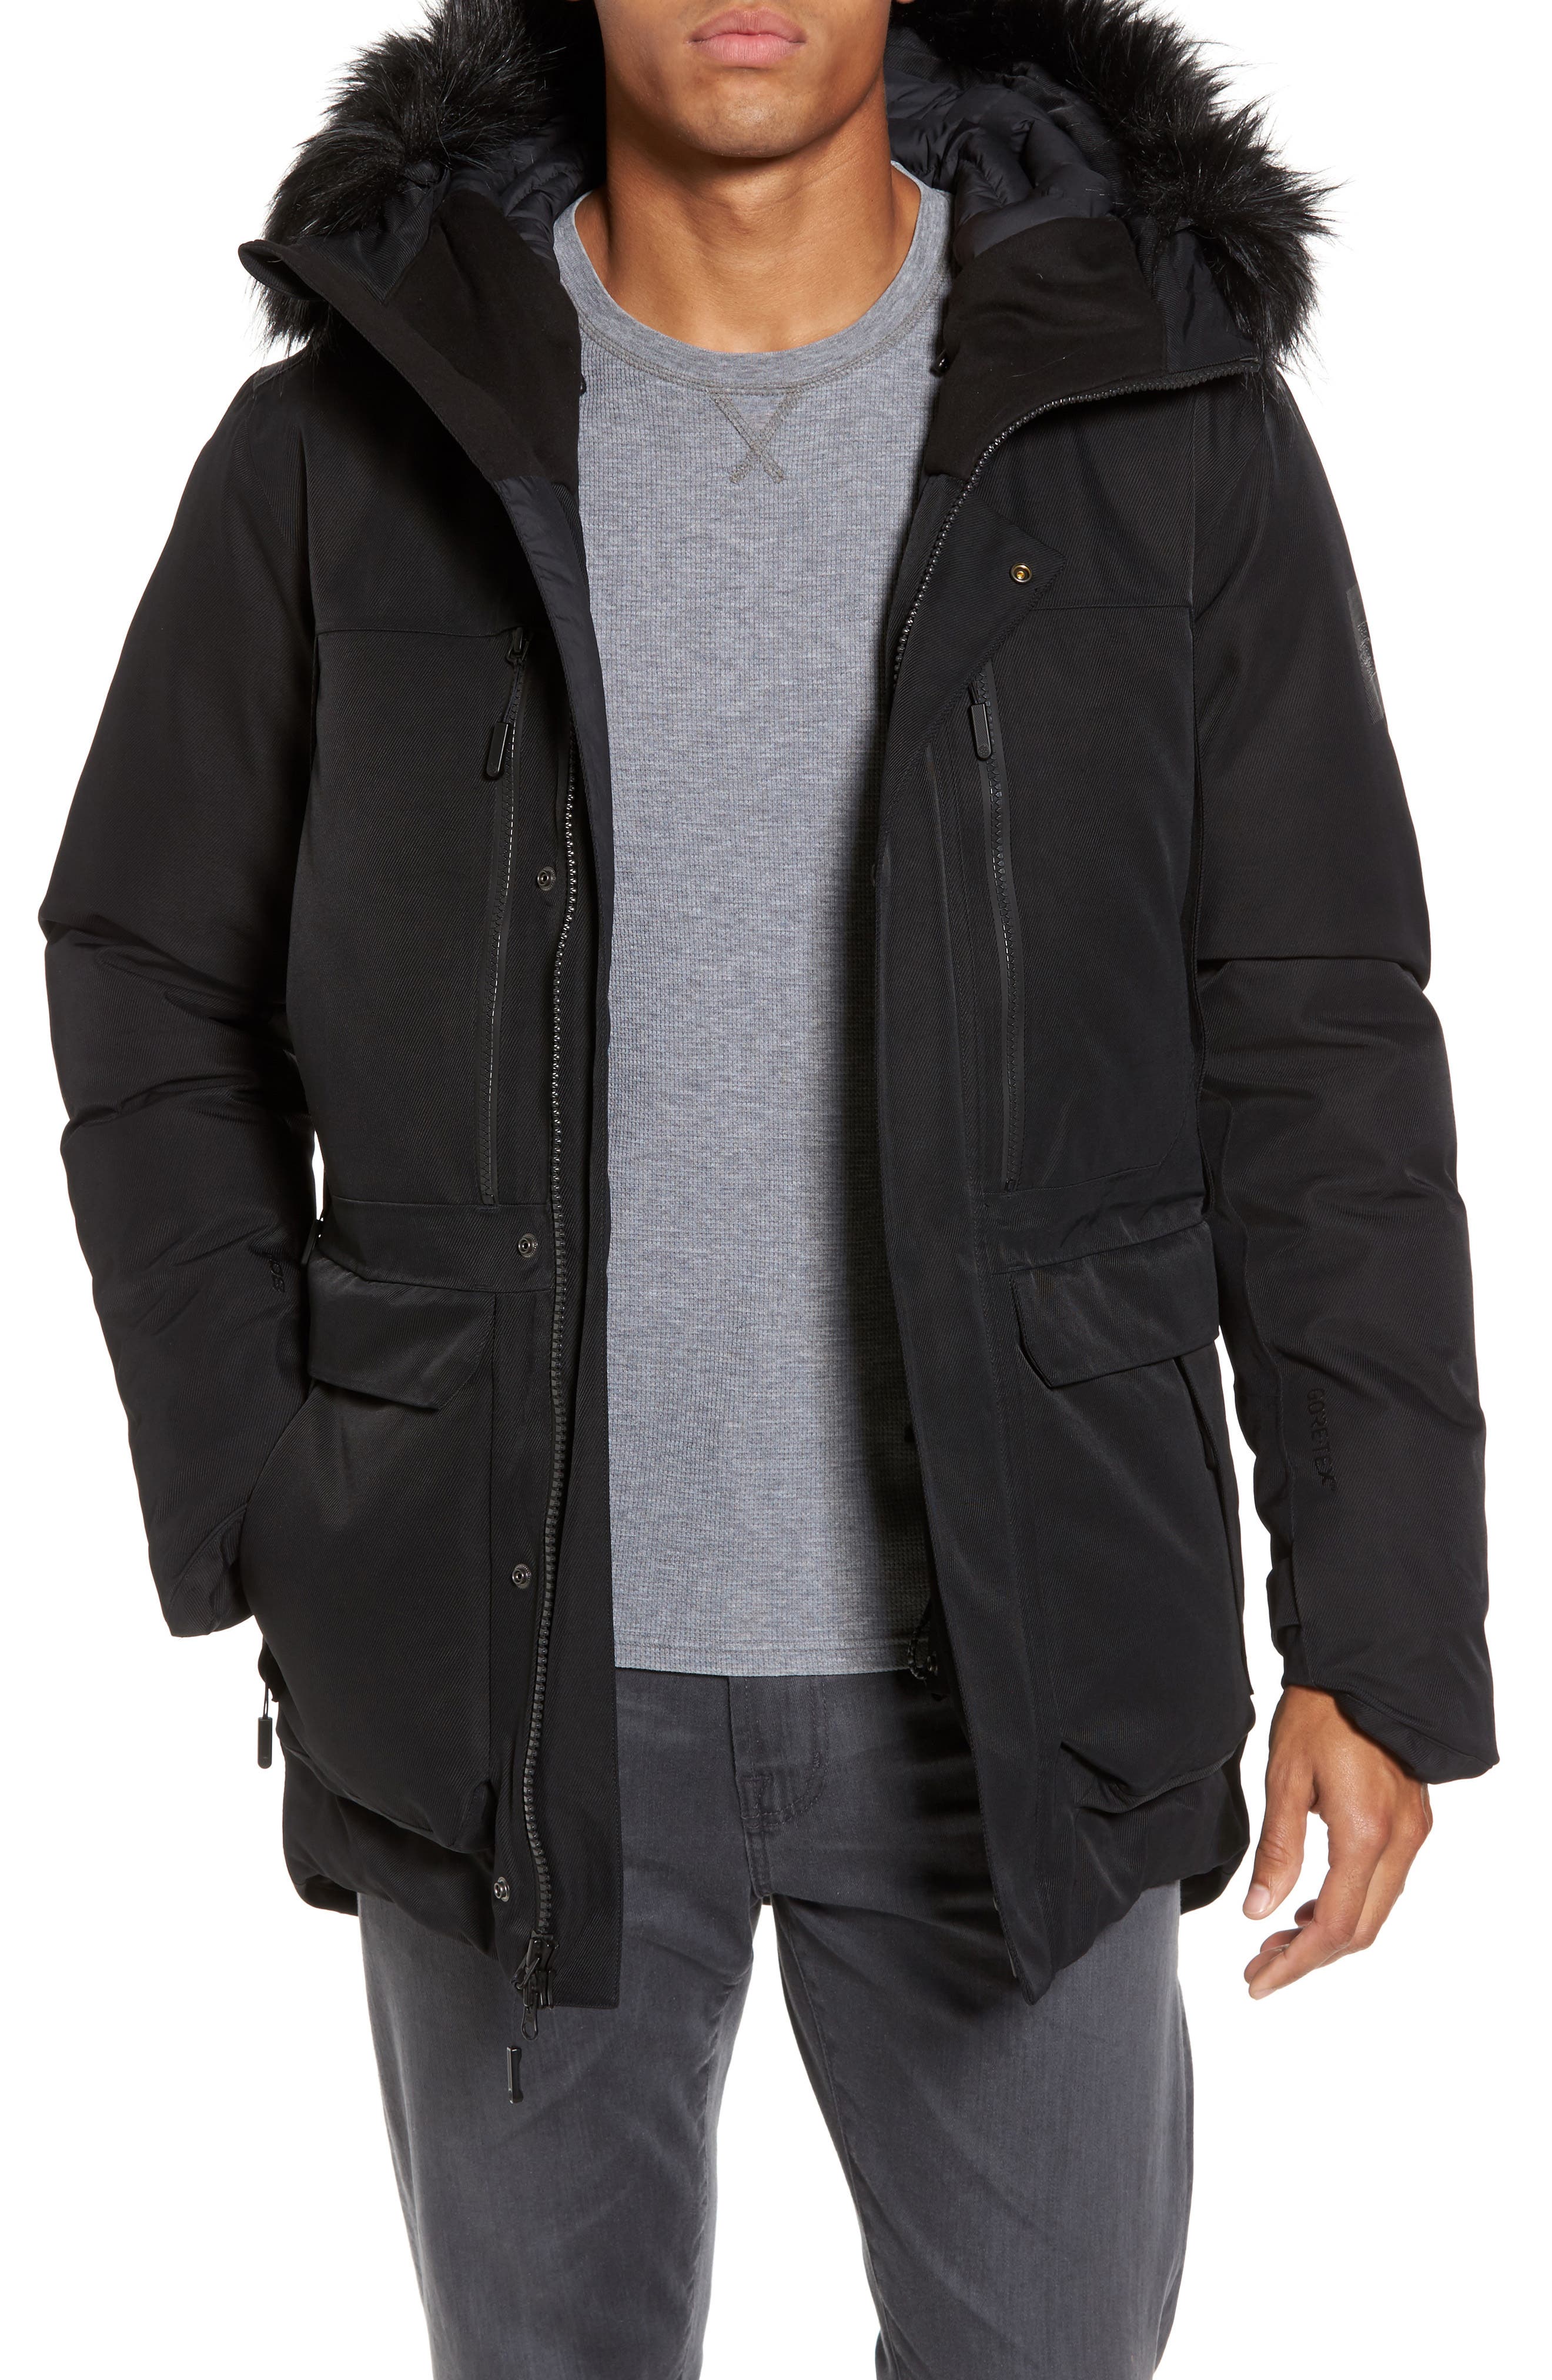 north face expedition jacket